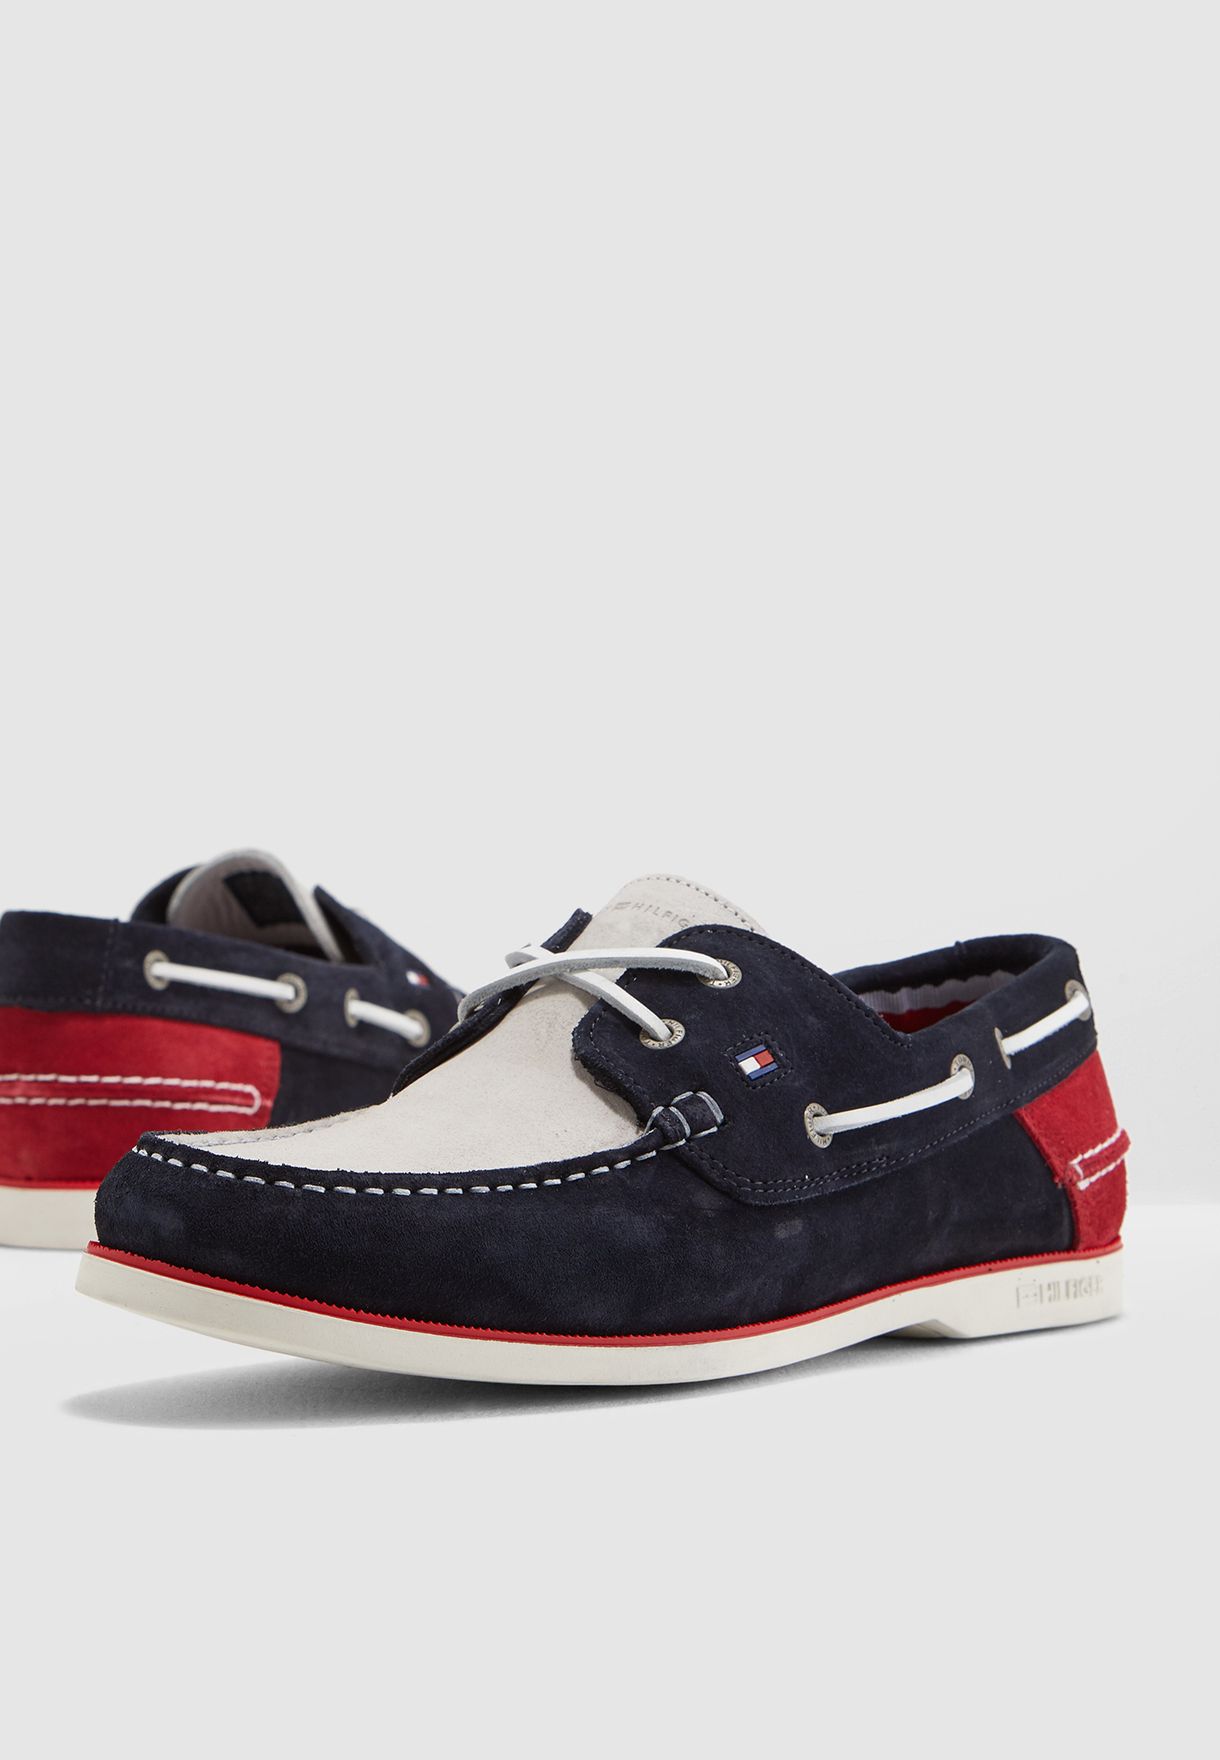 tommy hilfiger womens boat shoes